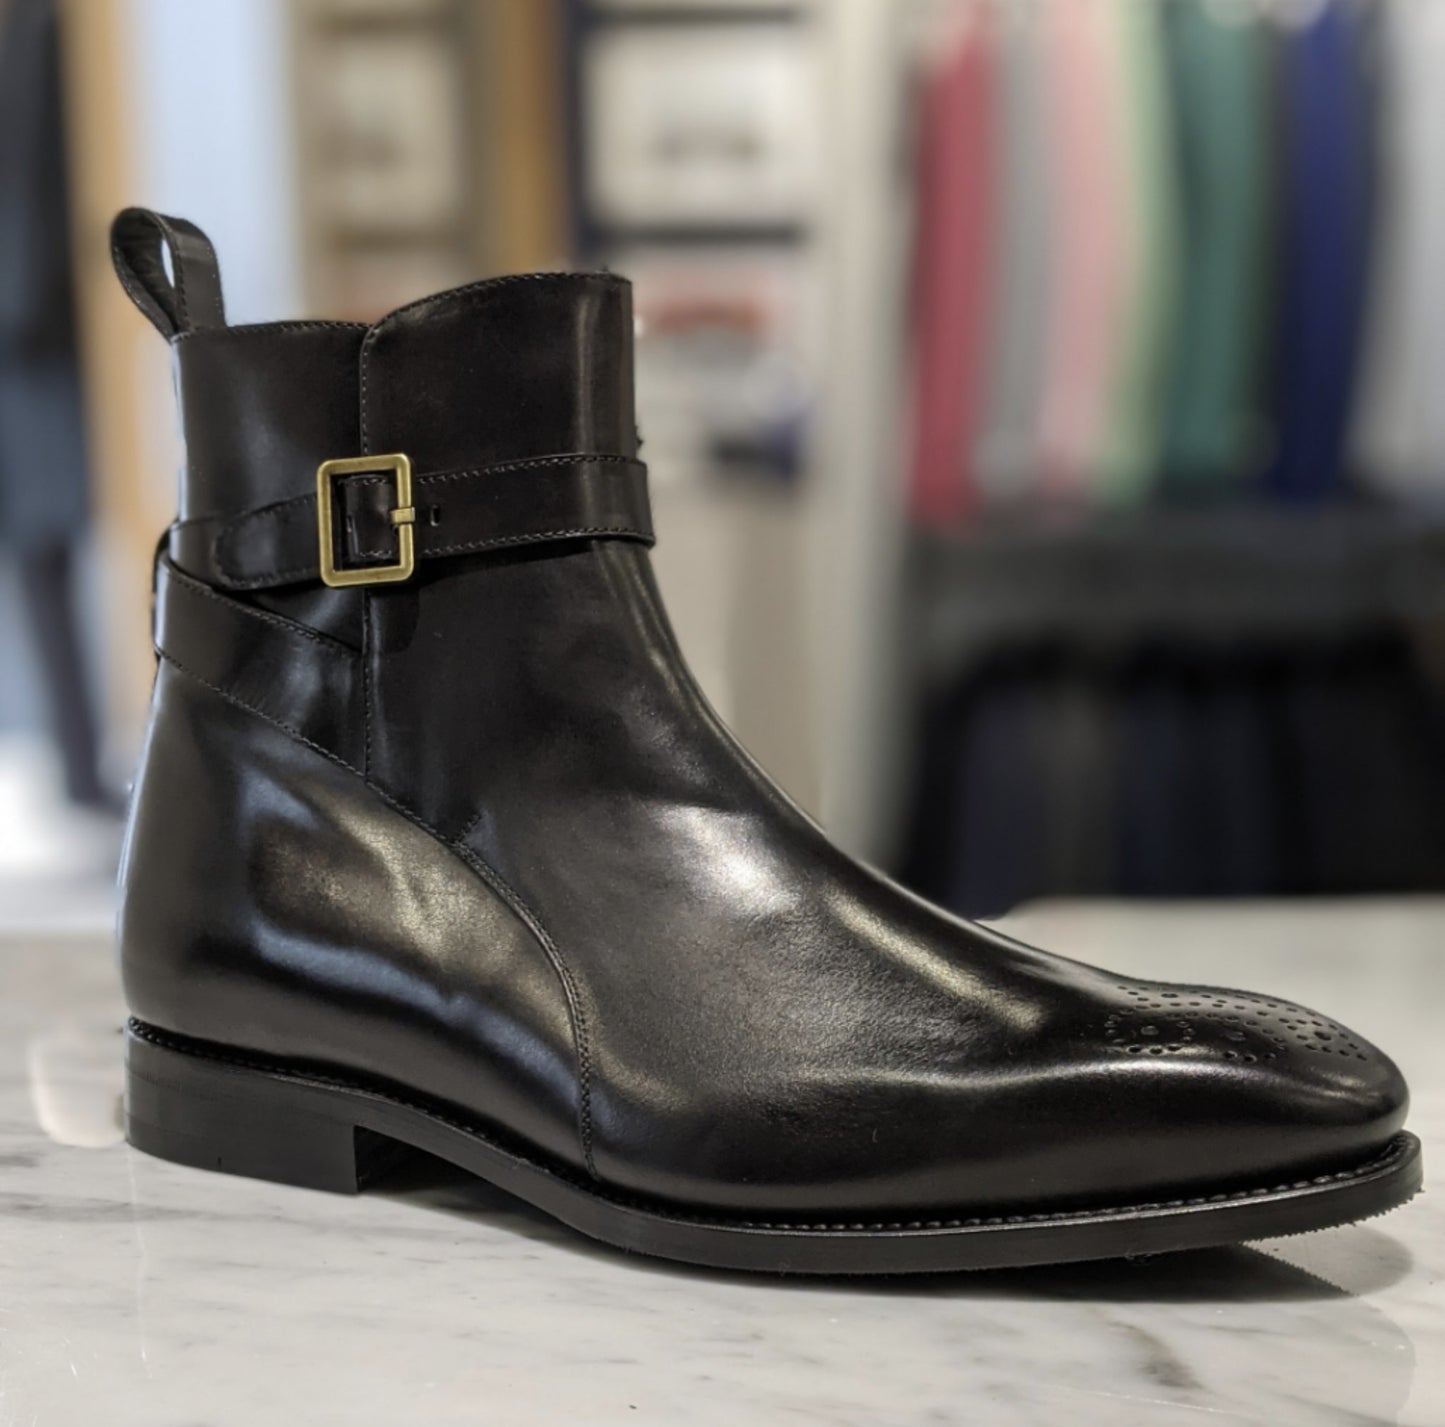 stride b boot will make you feel assertive and fresh every time